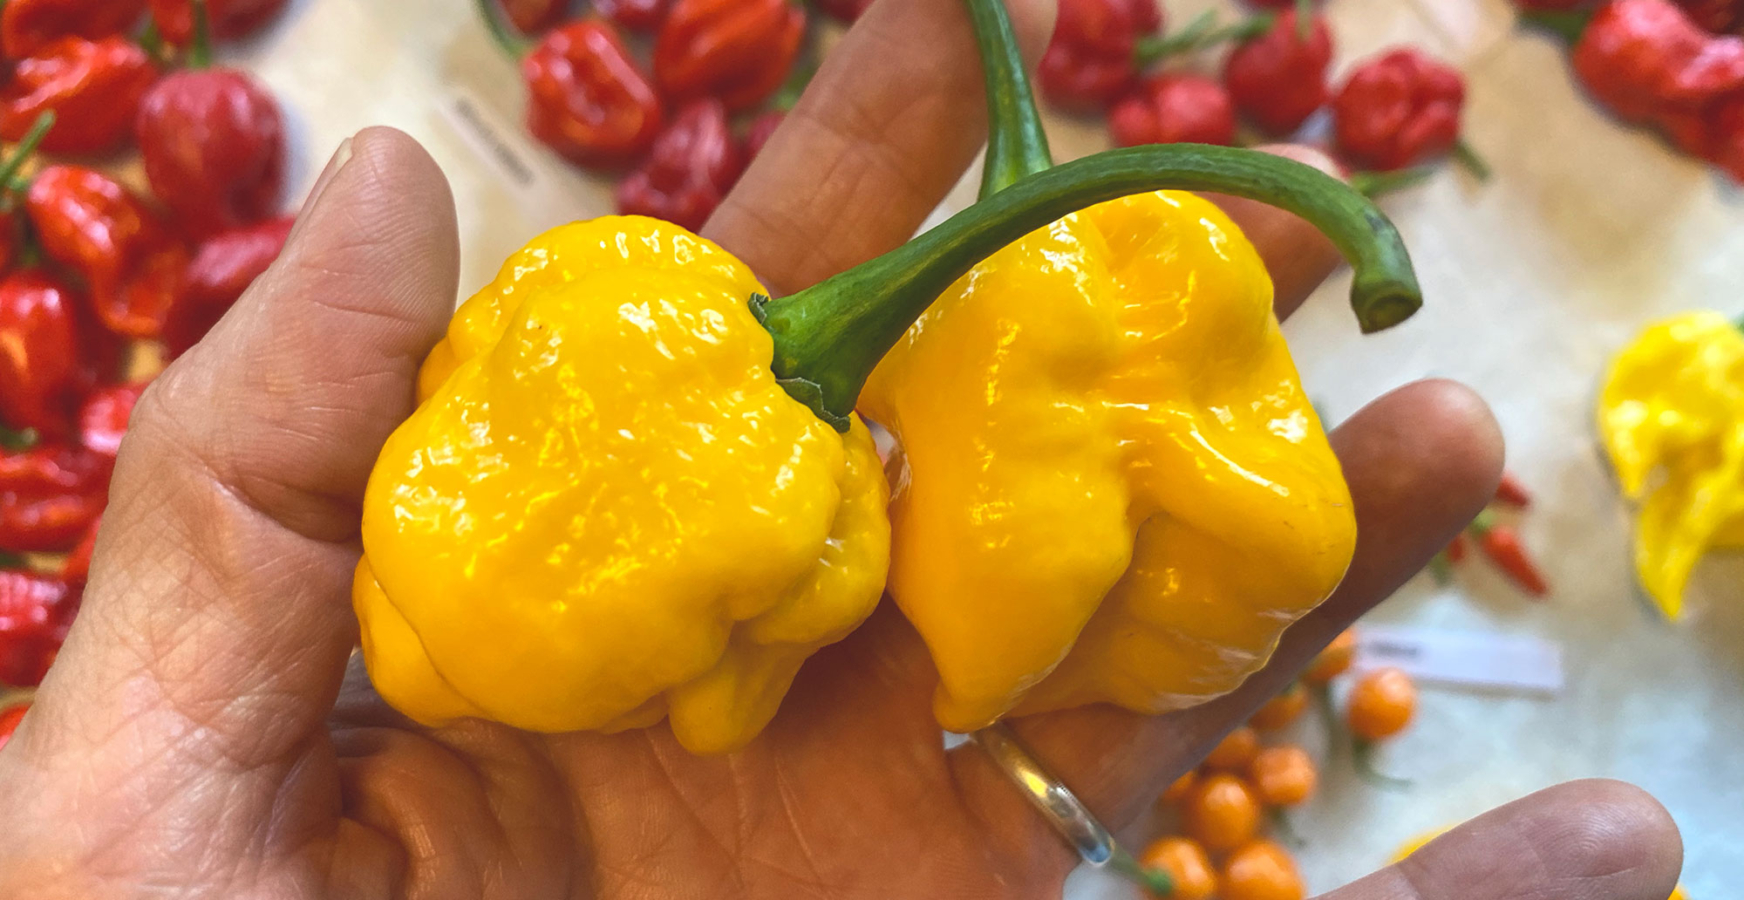 Two large 7 Pot Primo hot peppers held in the palm of a hand